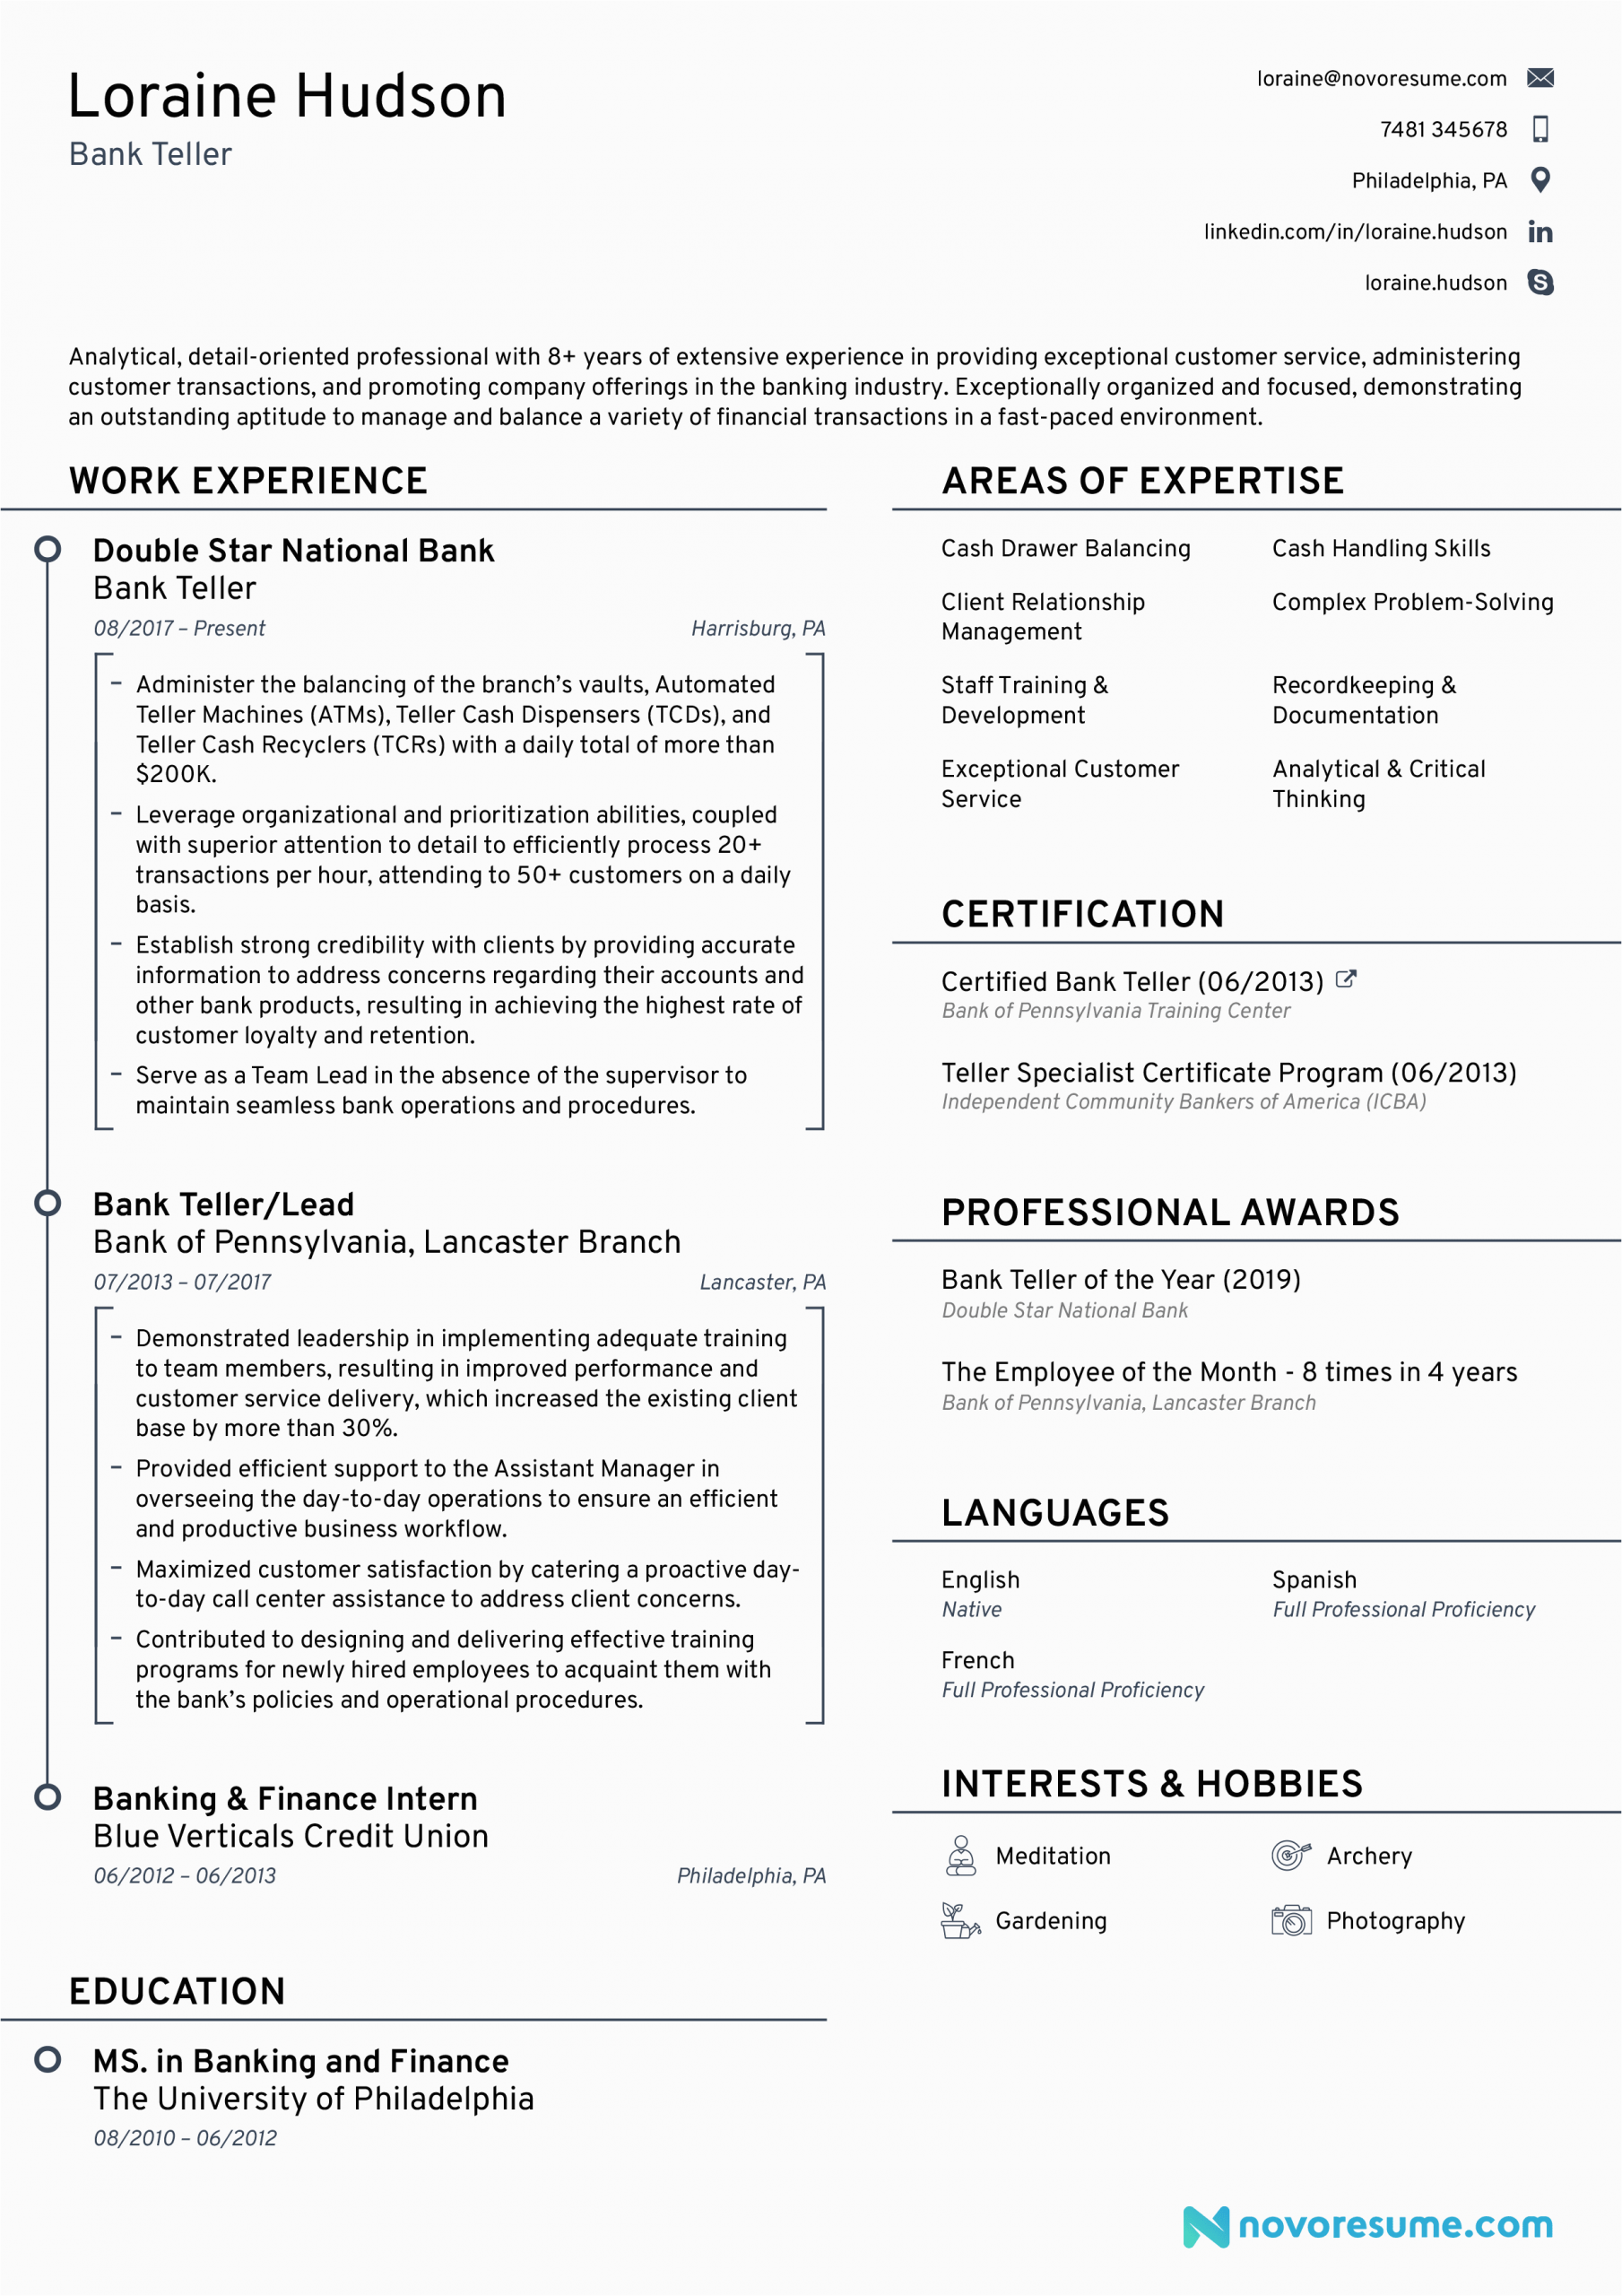 Sample Resume for Bank Teller with Experience Bank Teller Resume Examples [updated for 2021]